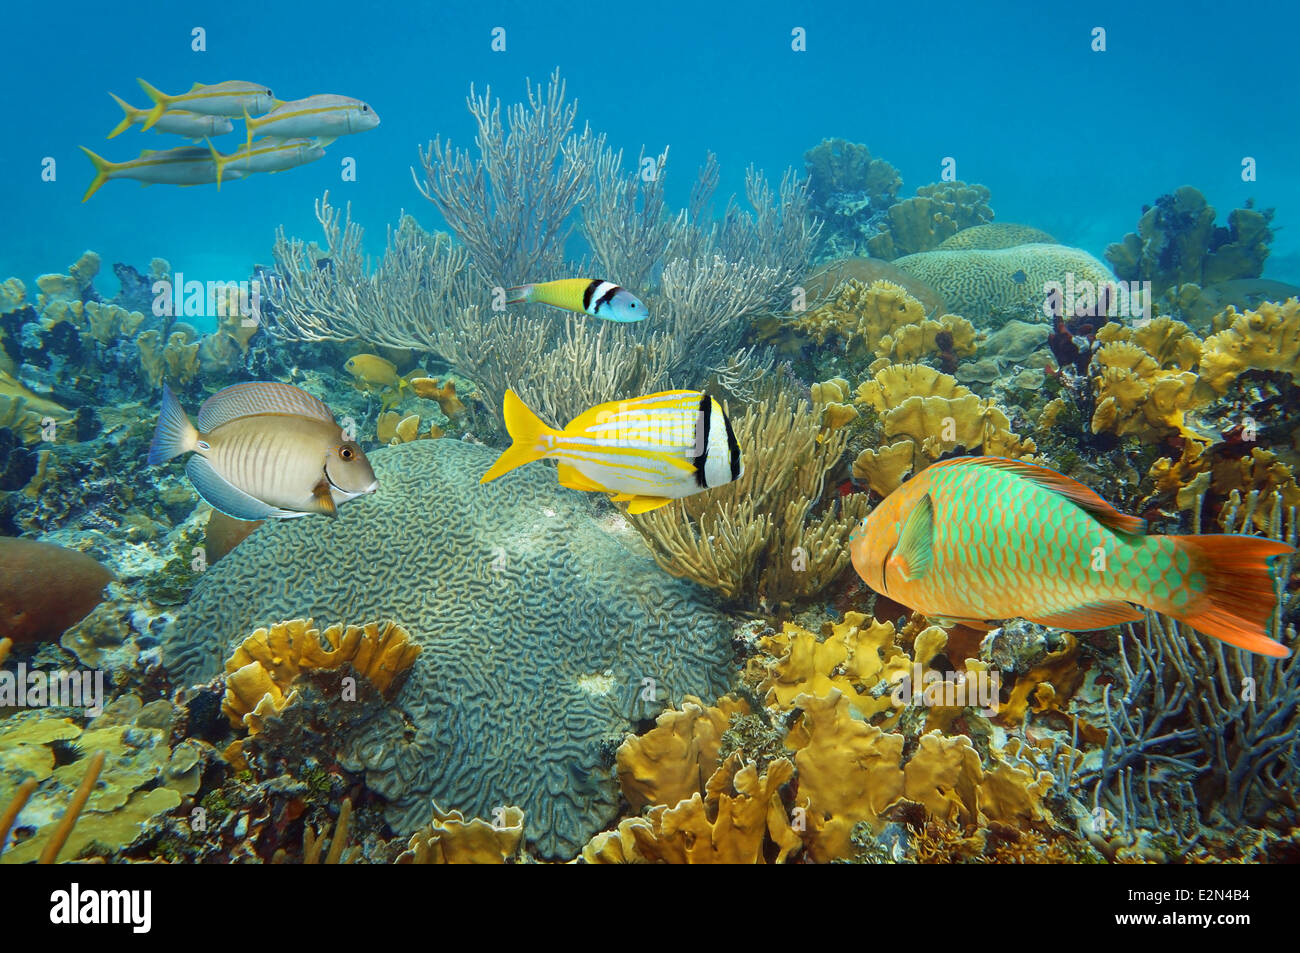 Underwater landscape in an healthy coral reef with colorful tropical fish Stock Photo